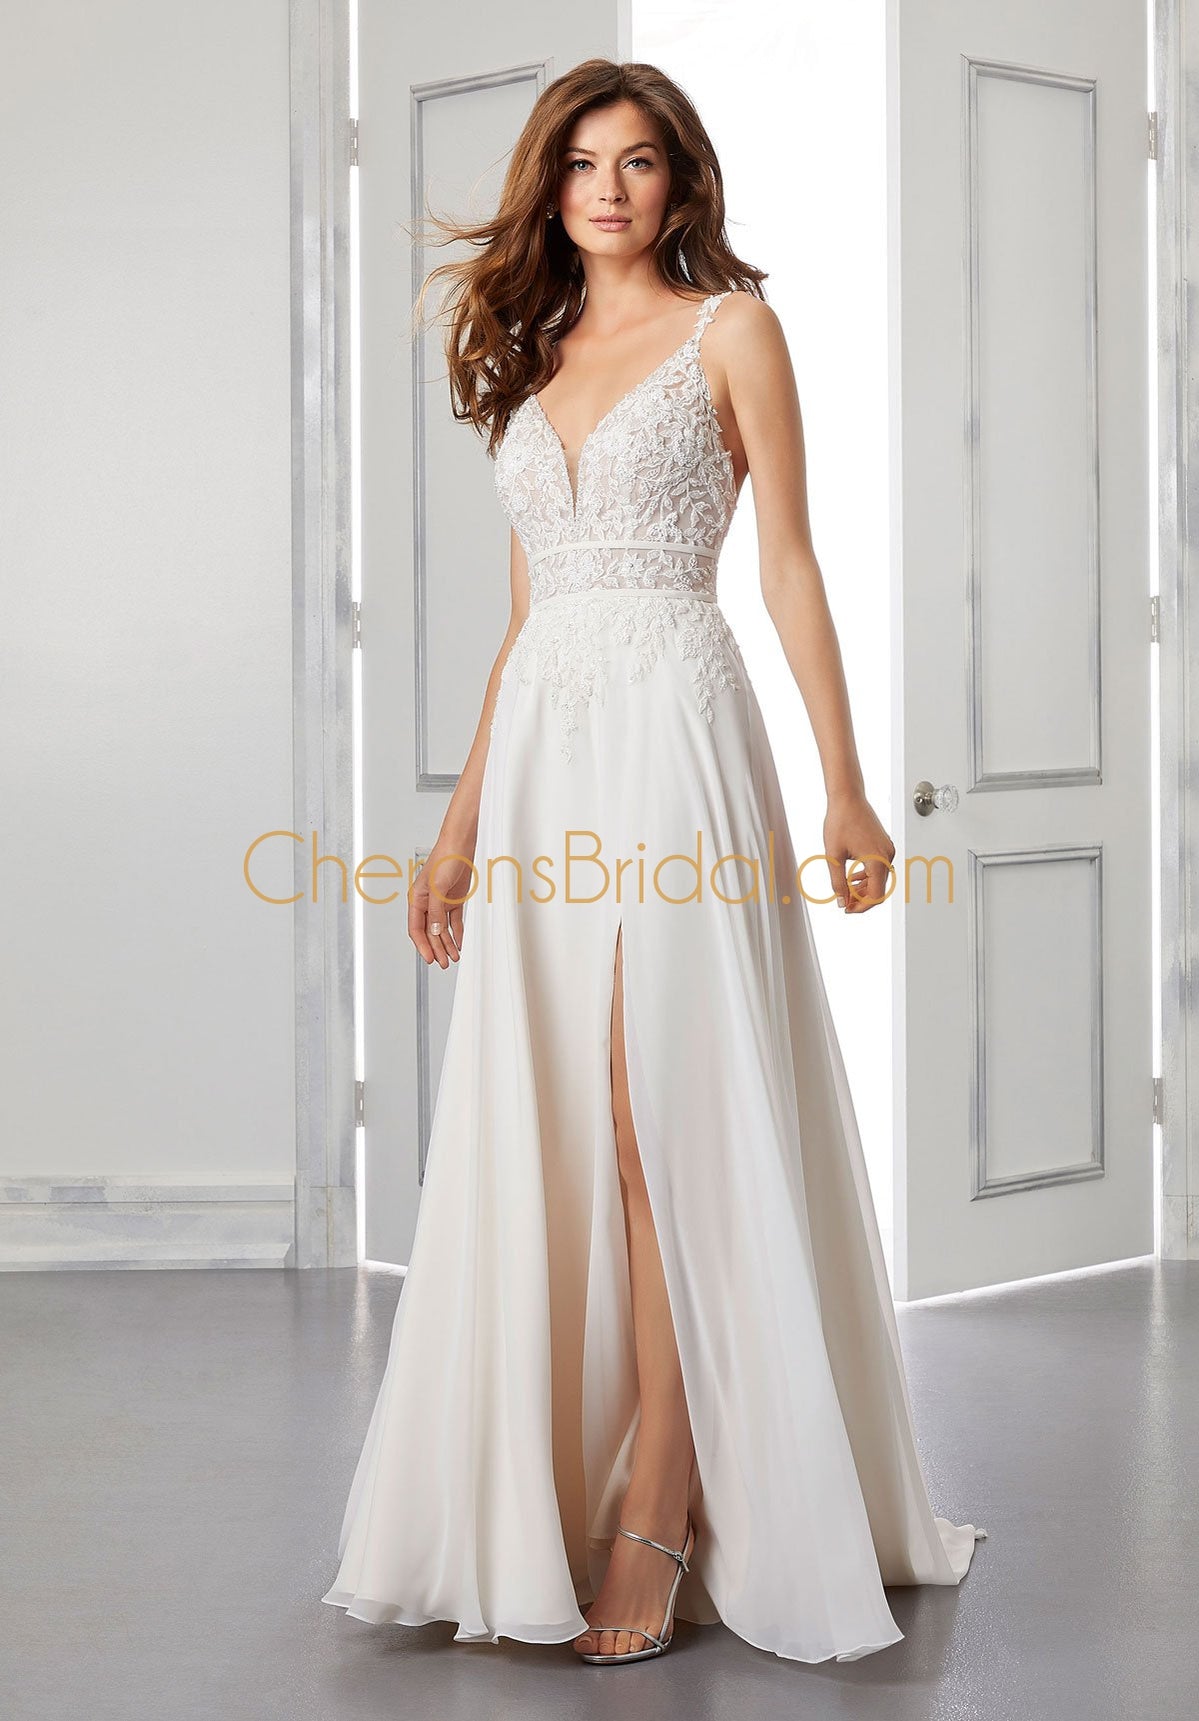 Voyage - 6942 - Brandy - Cheron's Bridal, Wedding Gown - Morilee Voyage - - Wedding Gowns Dresses Chattanooga Hixson Shops Boutiques Tennessee TN Georgia GA MSRP Lowest Prices Sale Discount